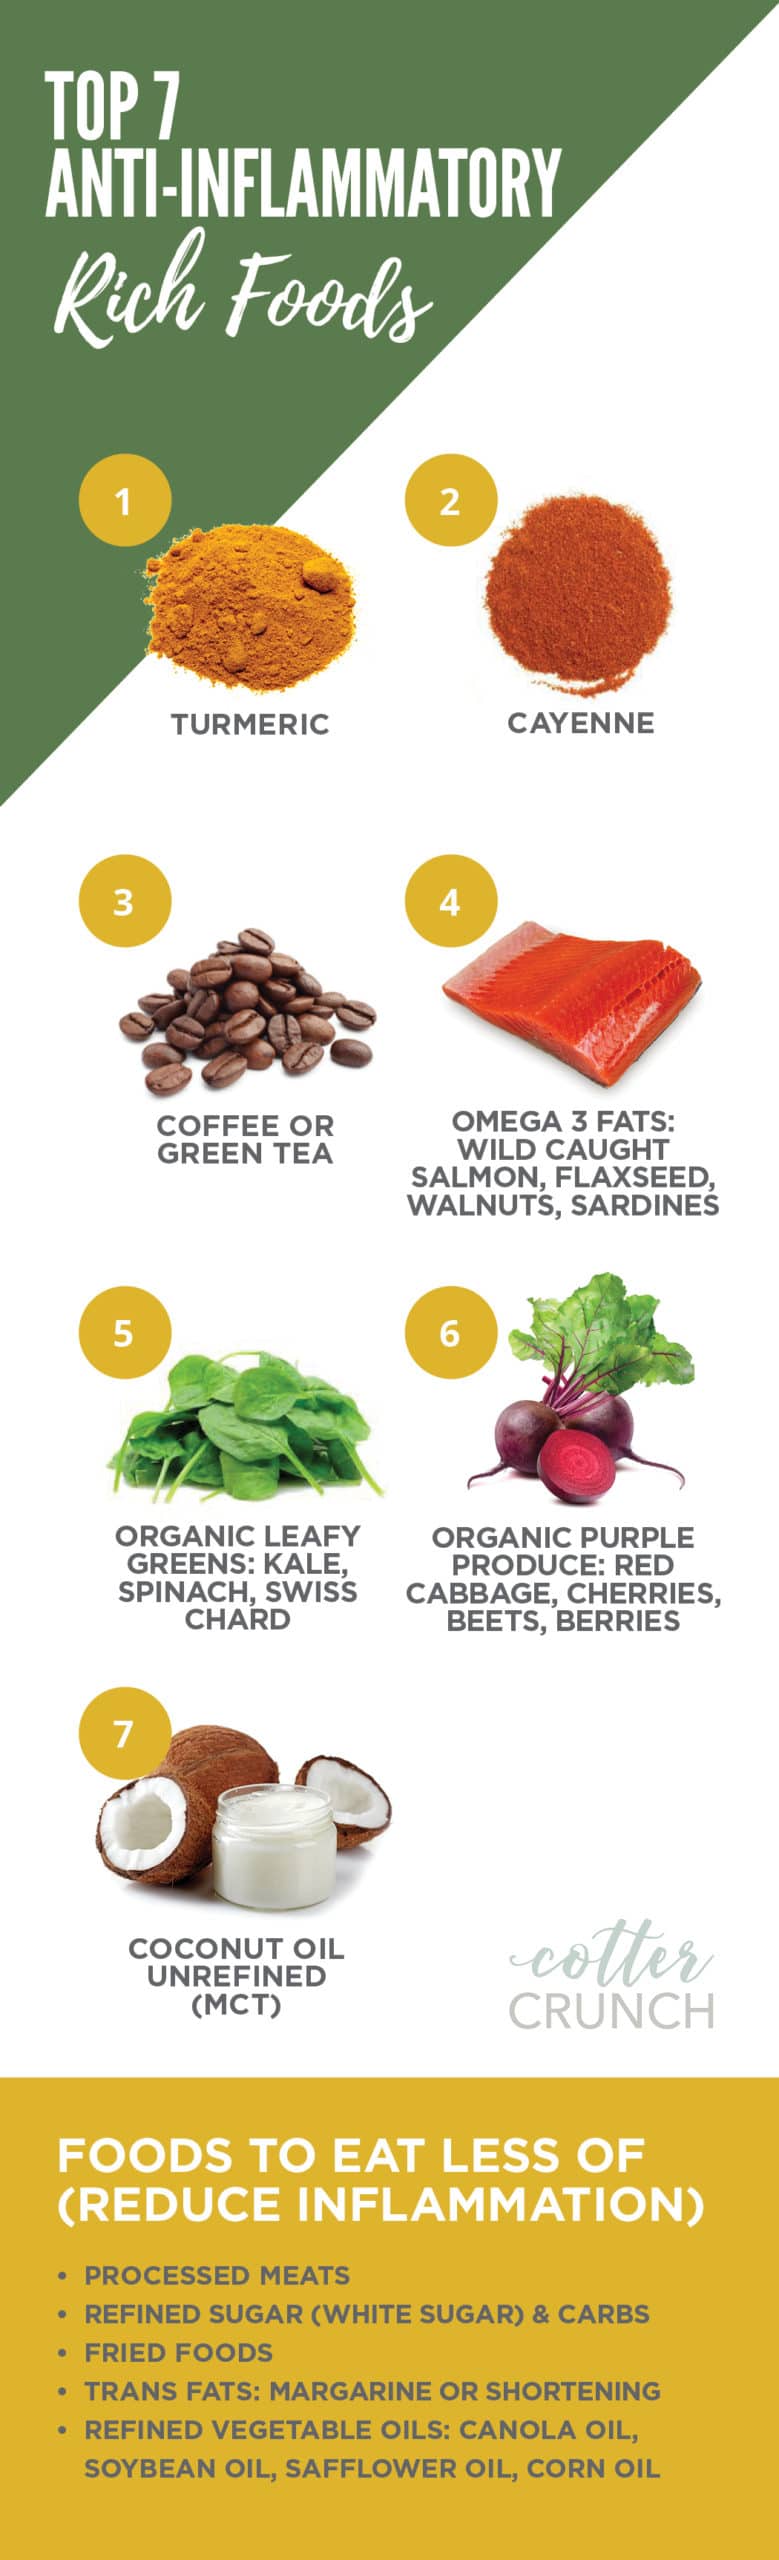 Anti Inflammatory foods graphic with photos and text.